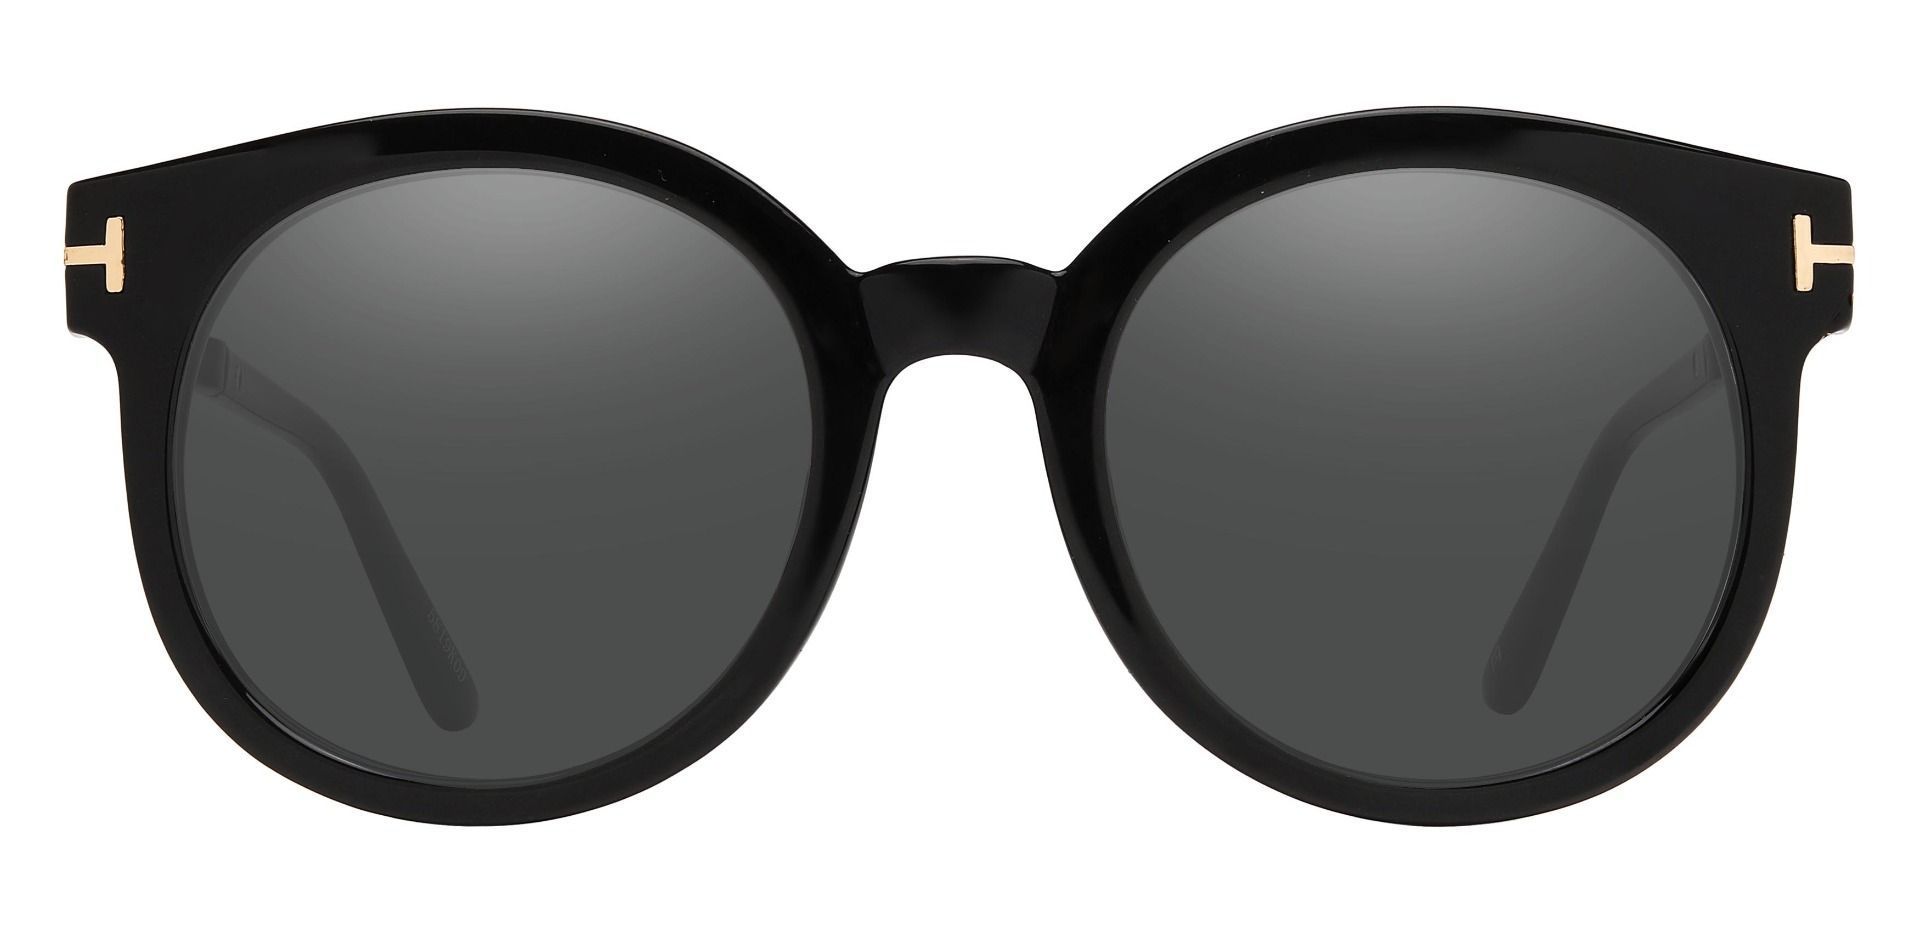 Fortuna Round Single Vision Sunglasses - Black Frame With Gray Lenses